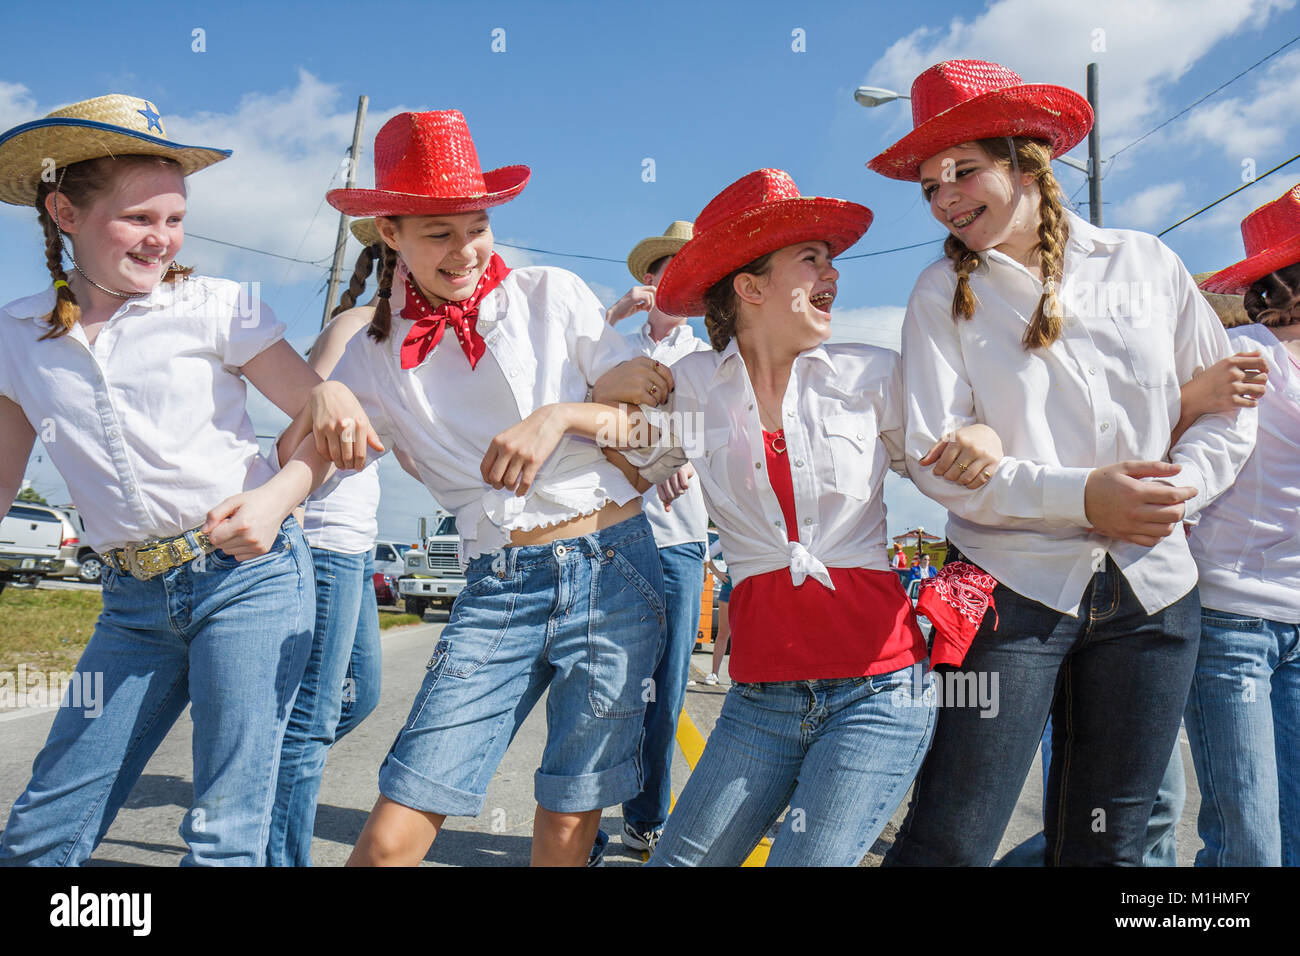 Miami Florida,Homestead,Rodeo Parade,participant,community event,tradition,girls,teen teens teenage teenager teenagers youth adolescent,Western attire Stock Photo